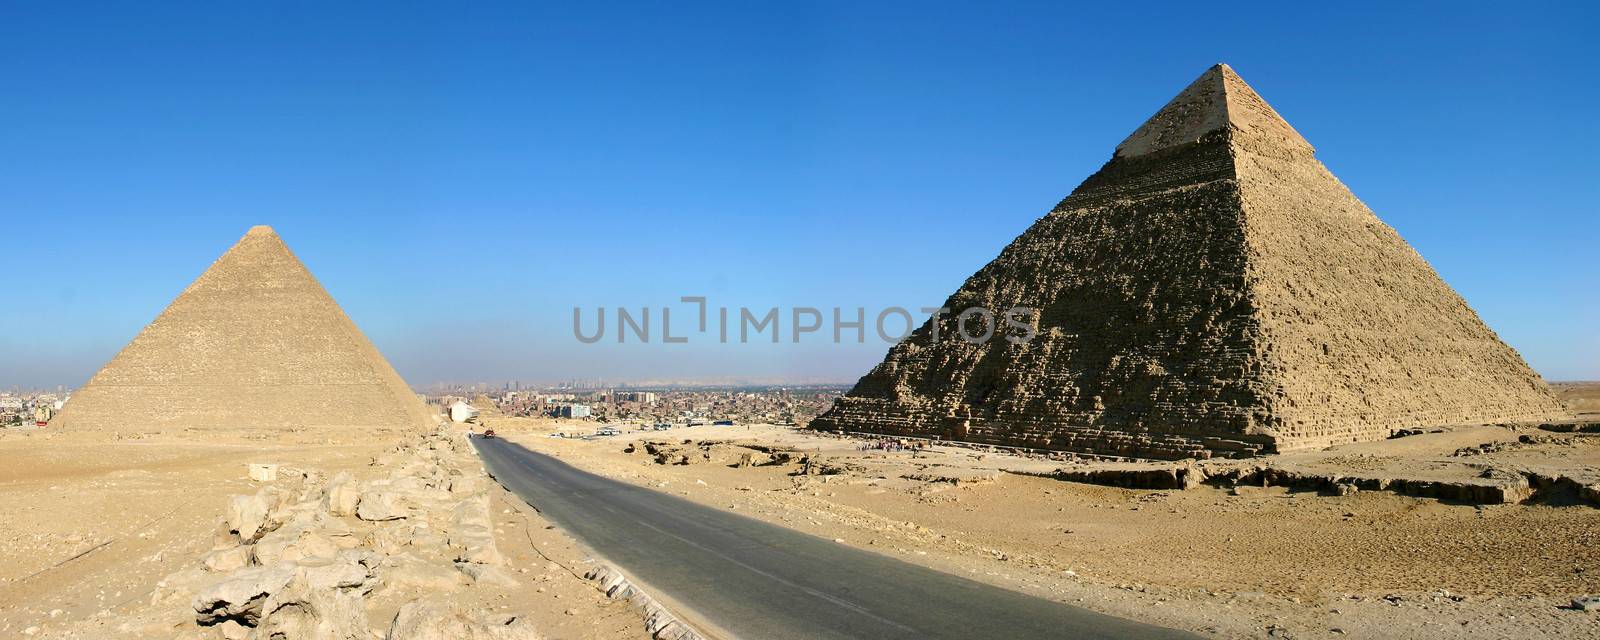 Pyramids of giza in Cairo by watchtheworld